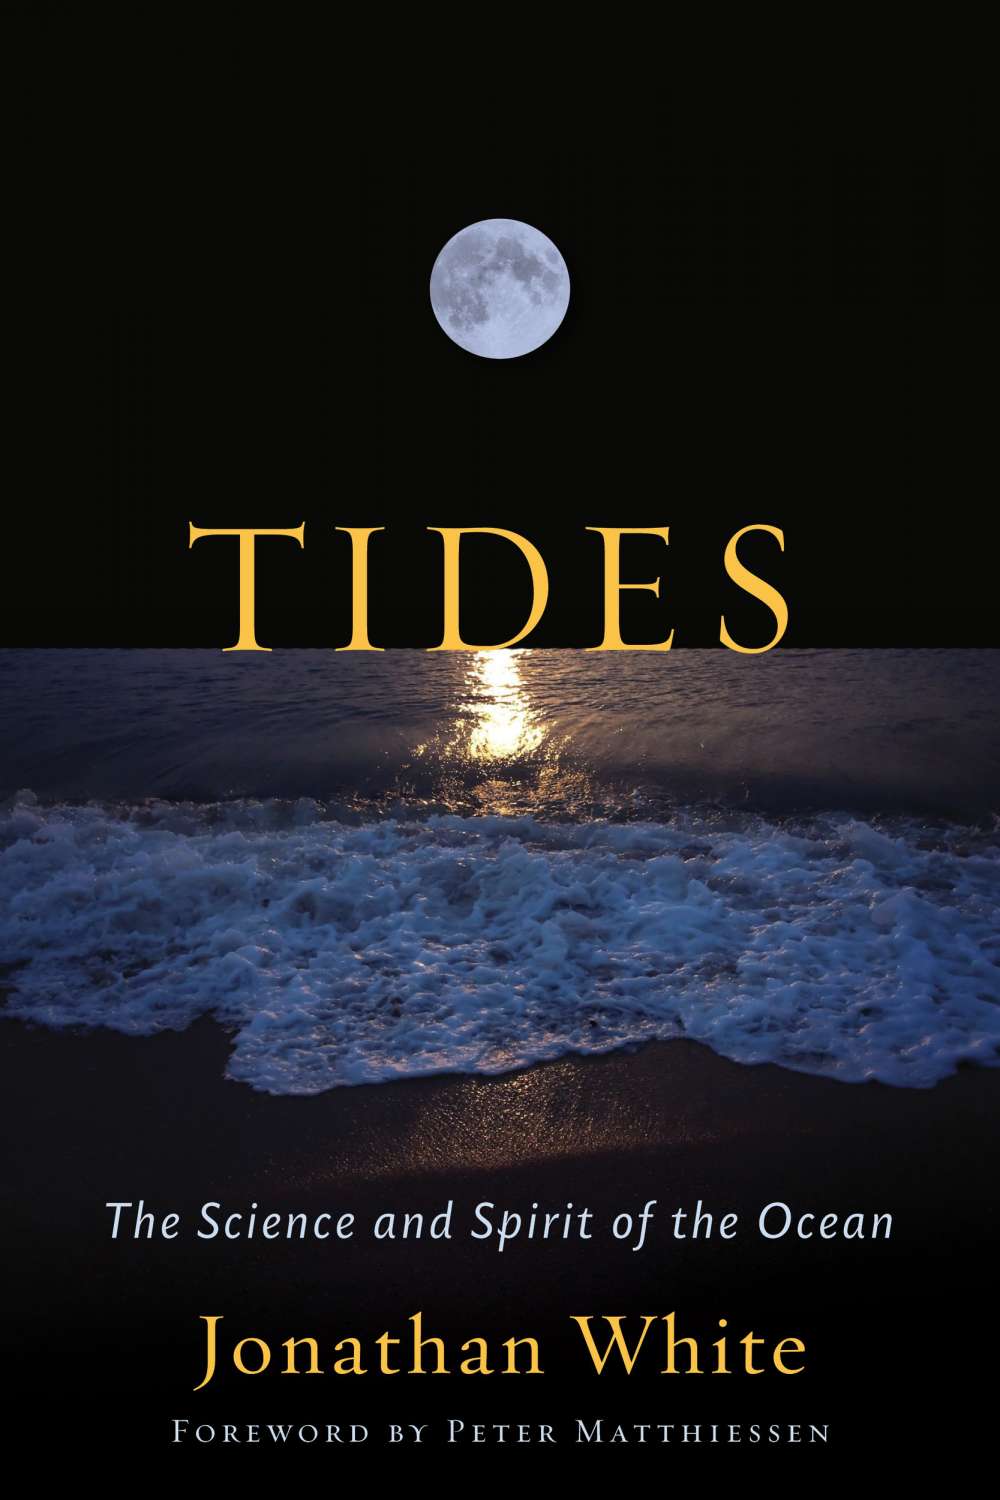 Book cover: TIDES, The Science and Spirit of the Ocean